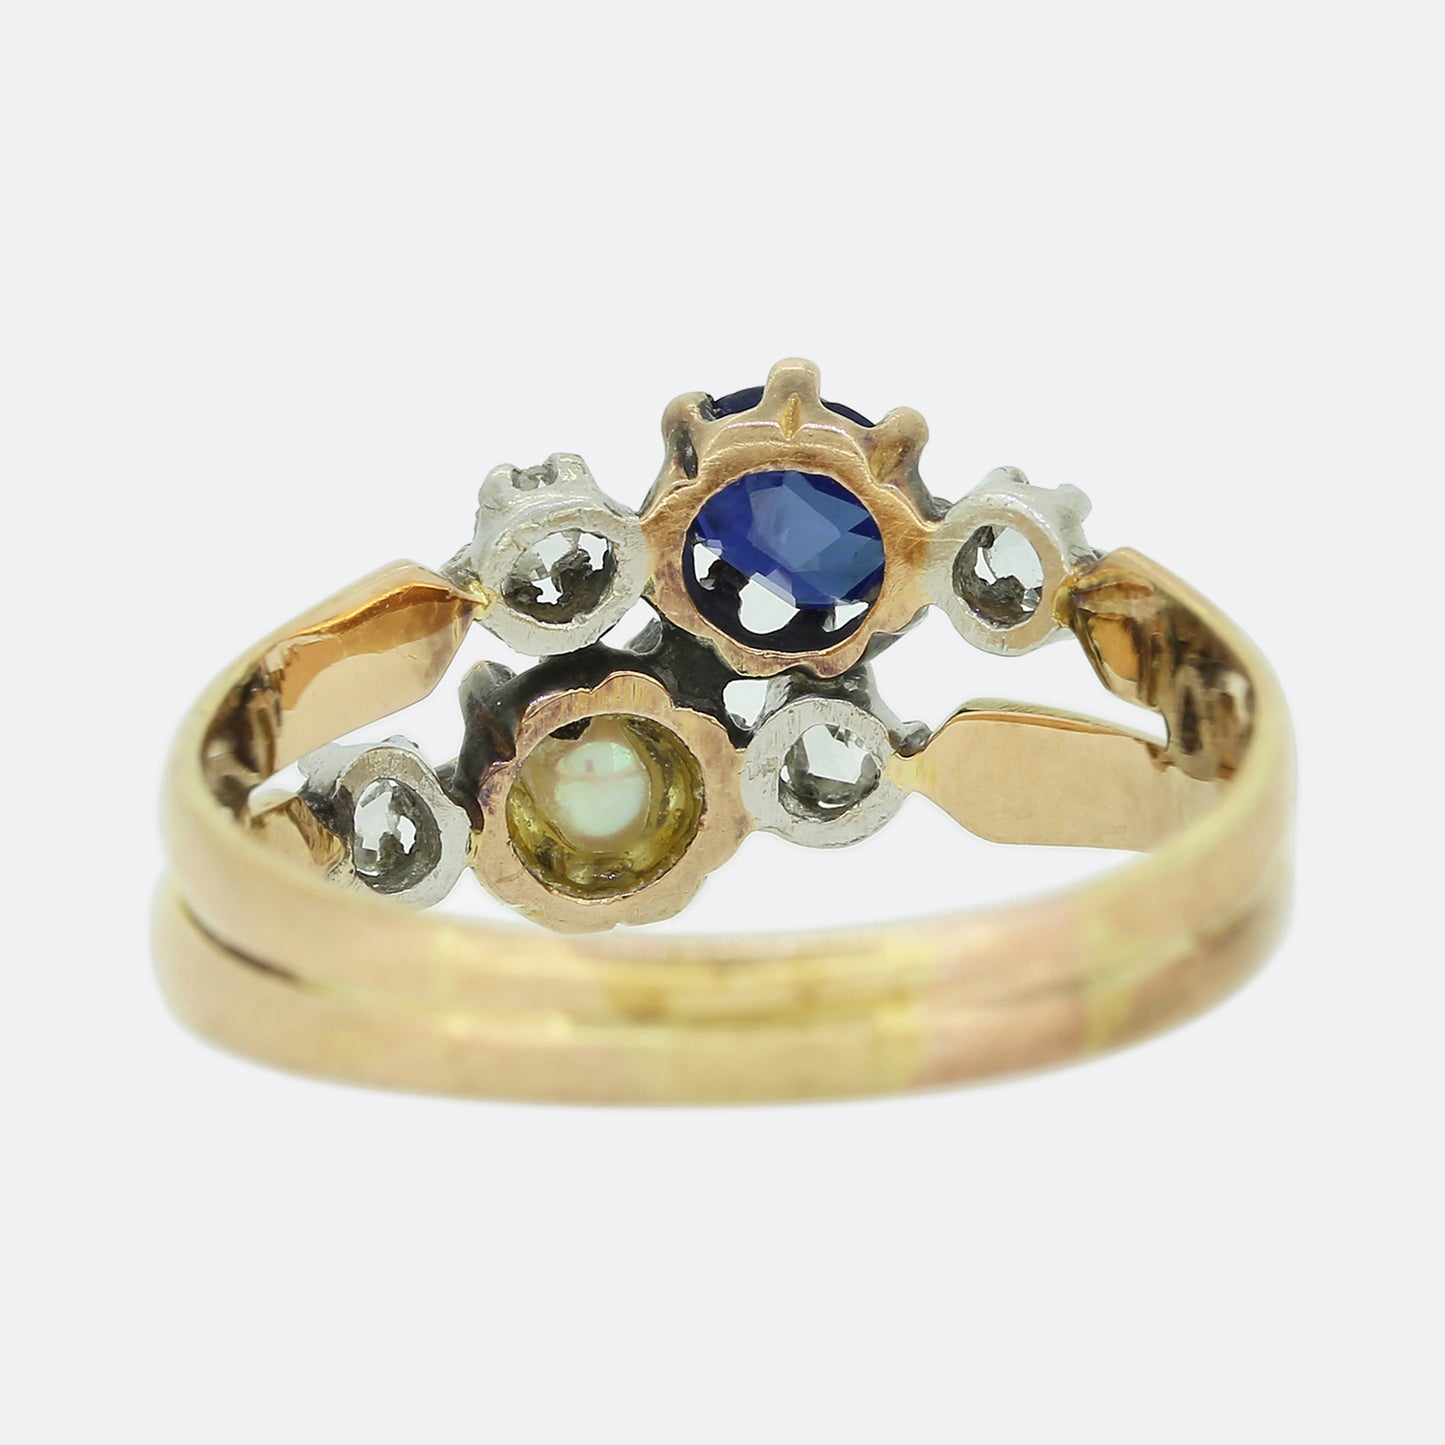 Victorian Sapphire, Pearl and Diamond Ring